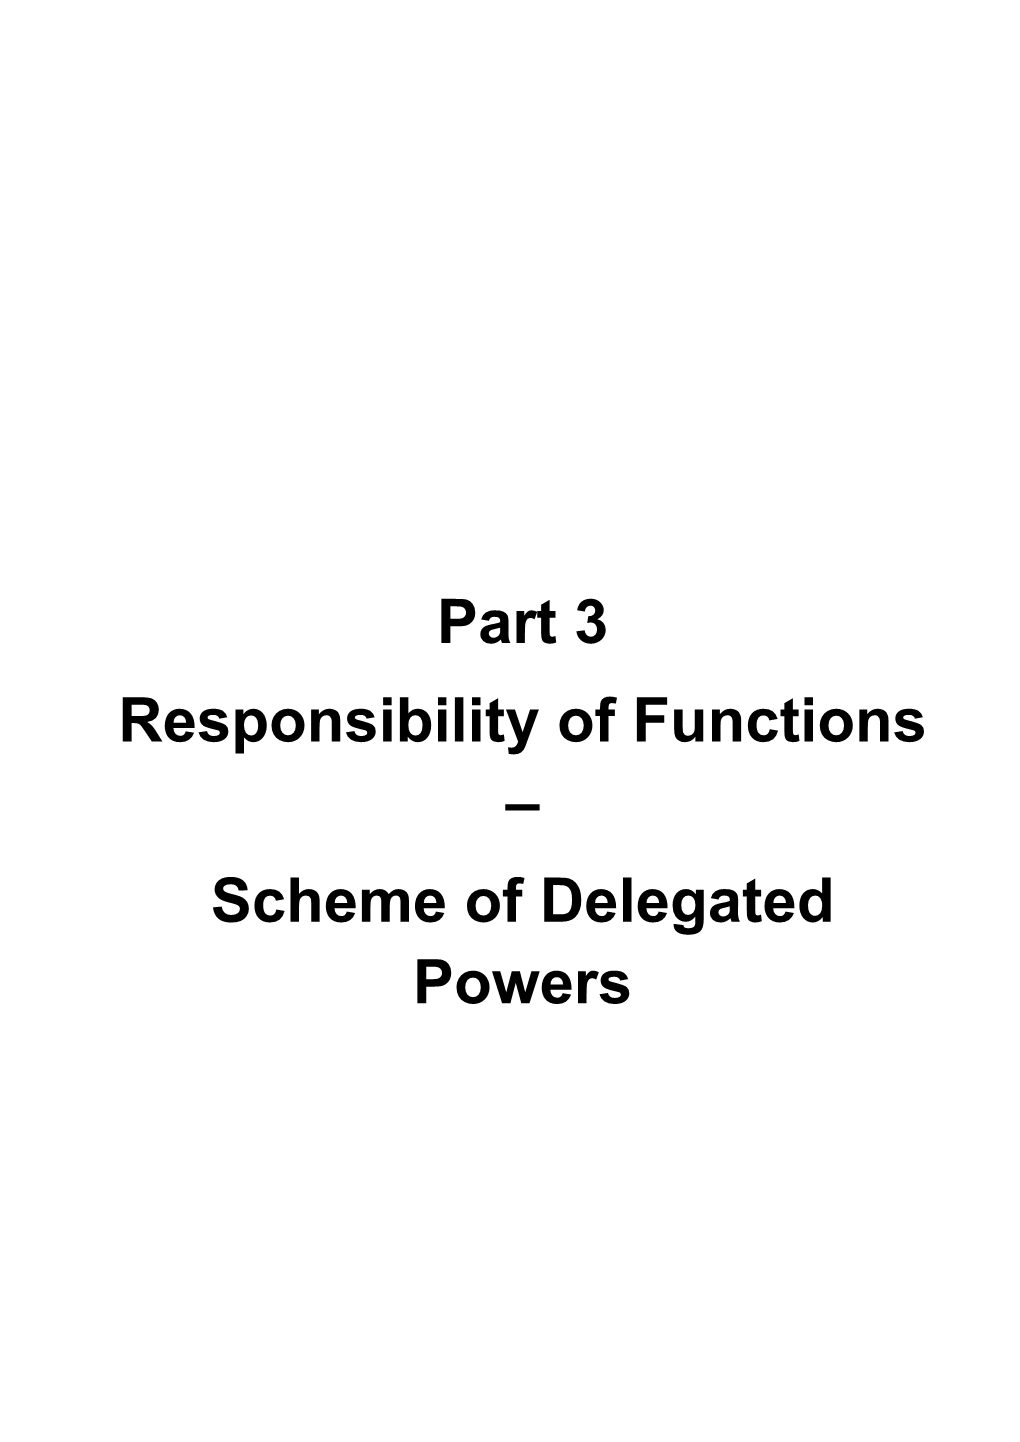 Scheme of Delegated Powers